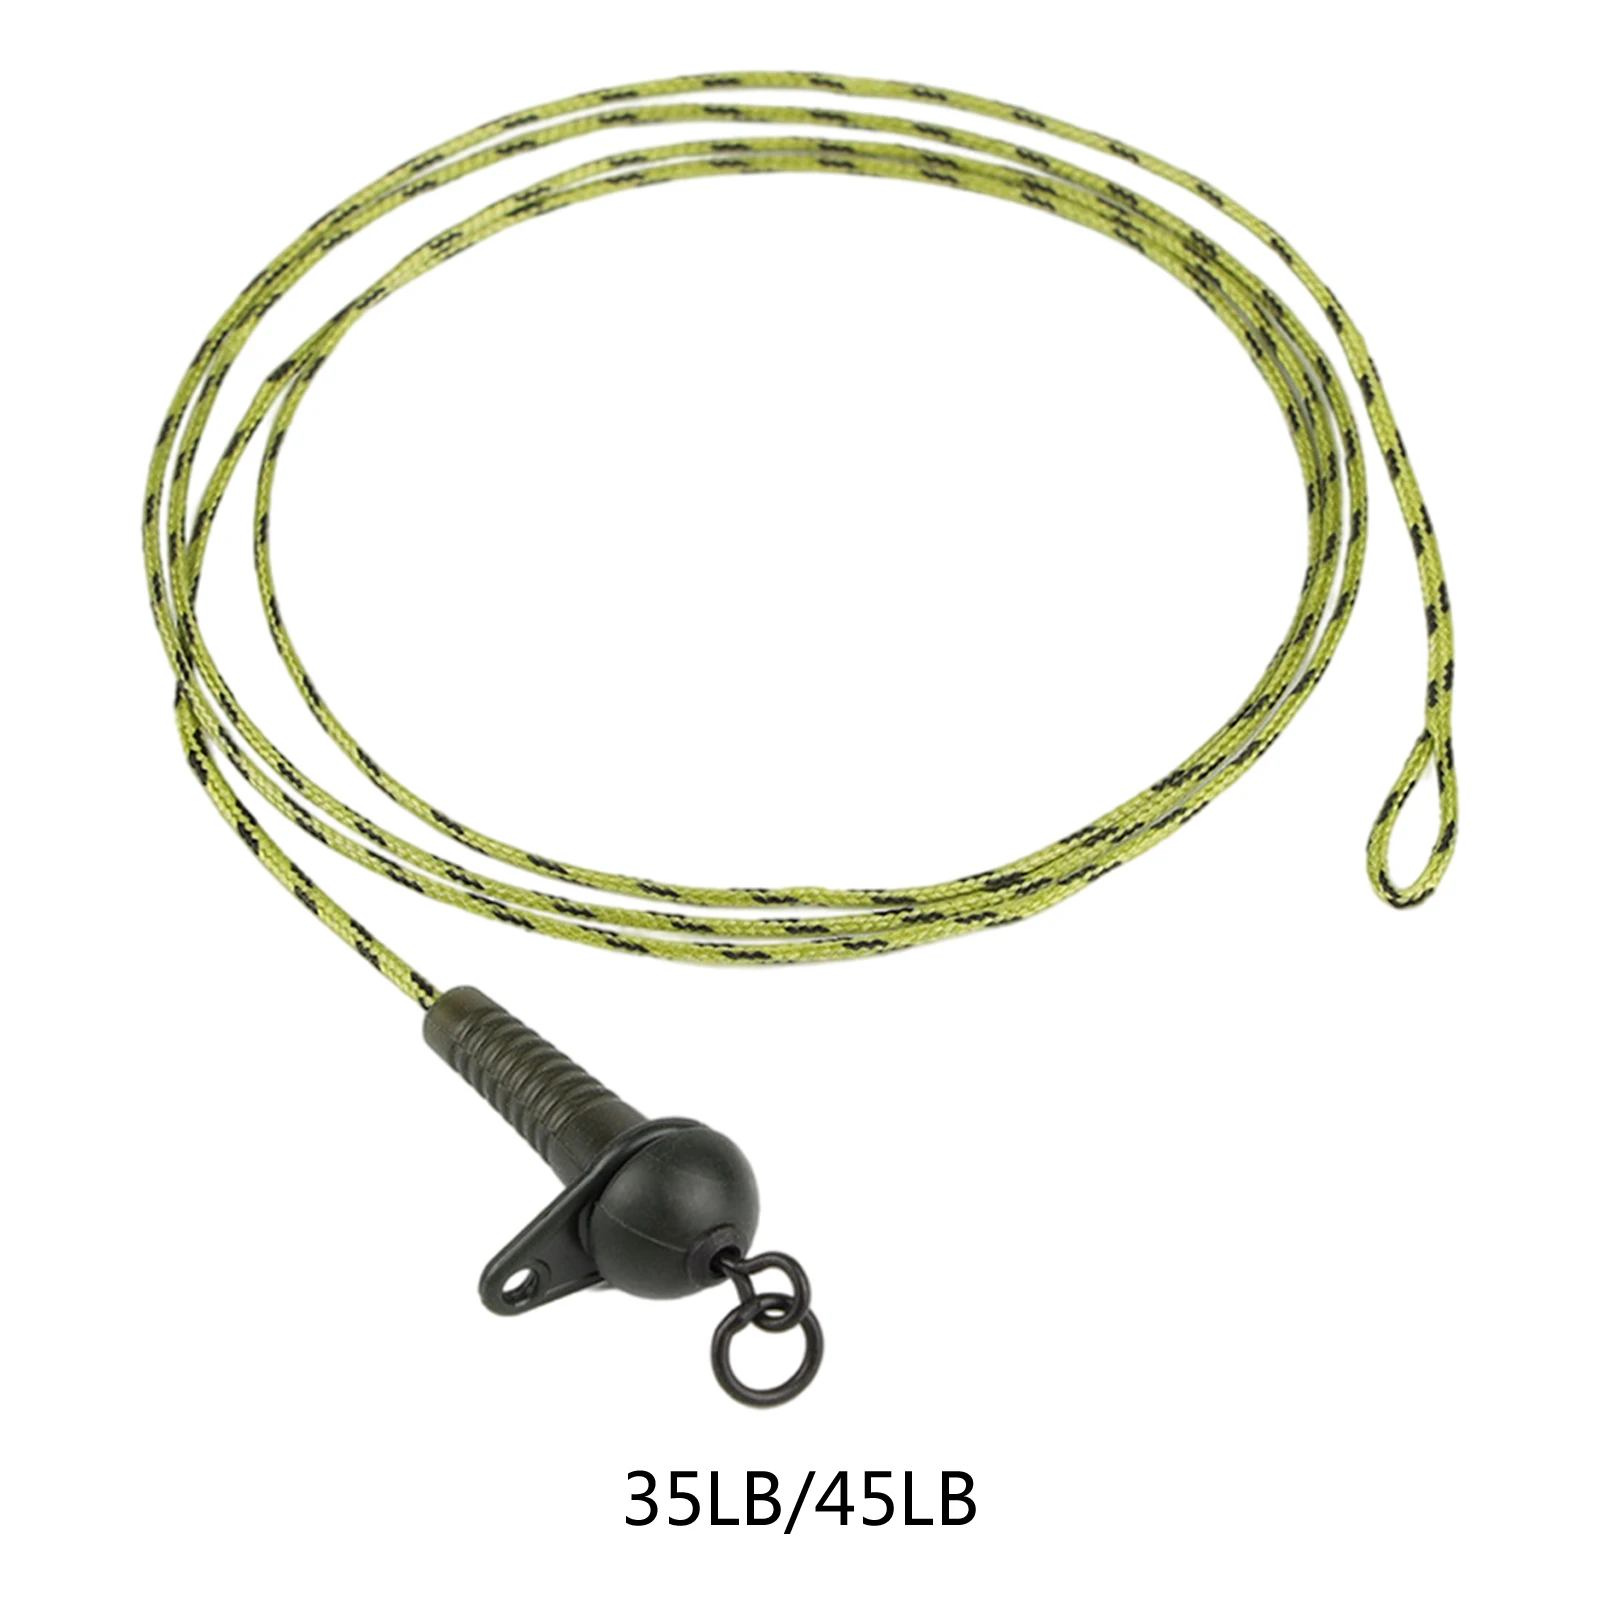 Carp Fishing Leaders Line High Strength Fishing Lead Core Line with Swivel for Rig Making Catfish Pike Fishing Accessories